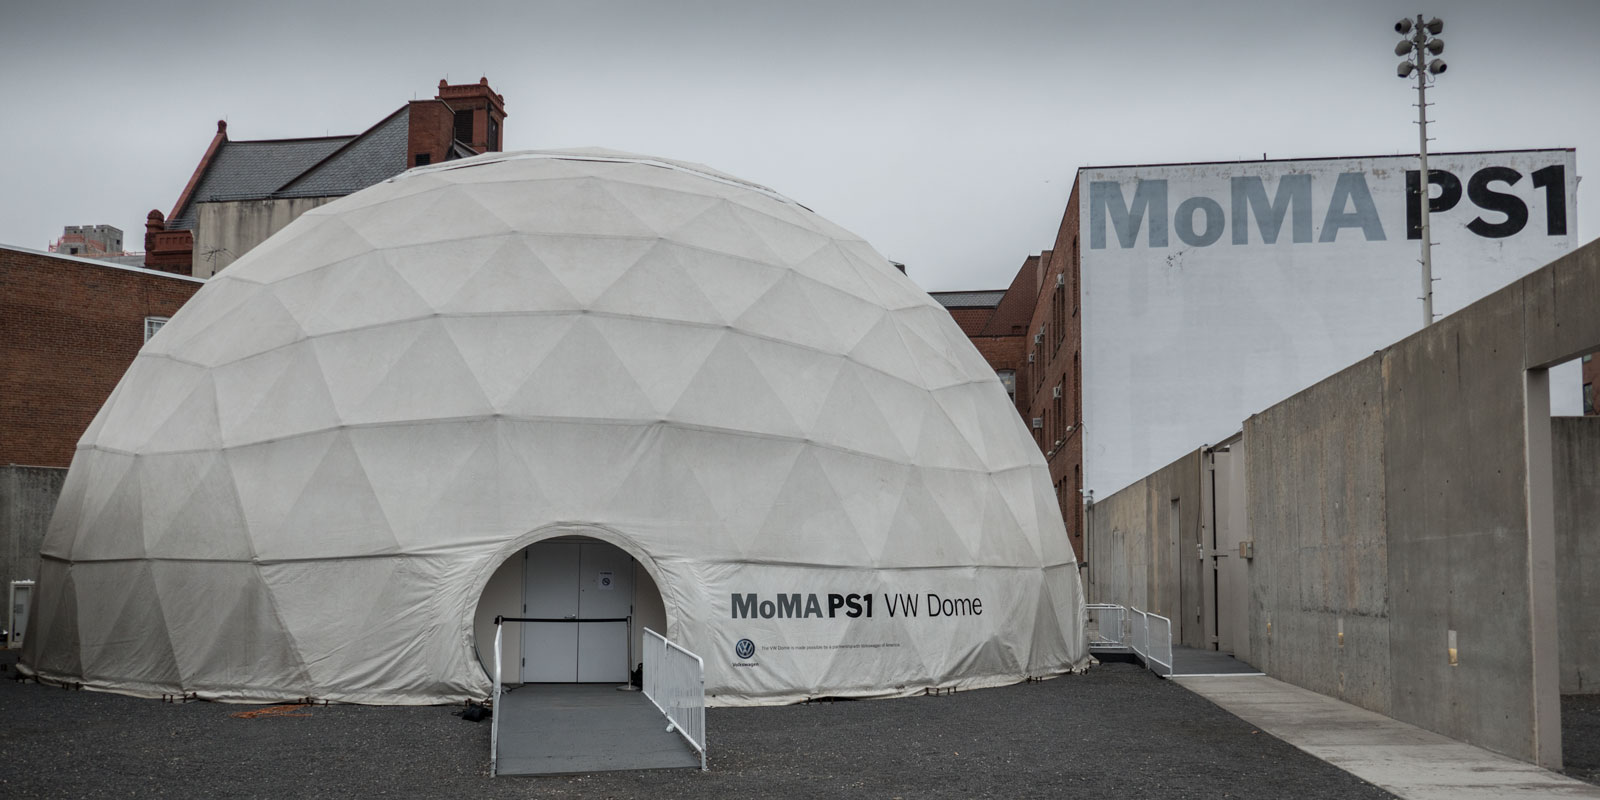 MOMA PS1 Long Island City Queens New York